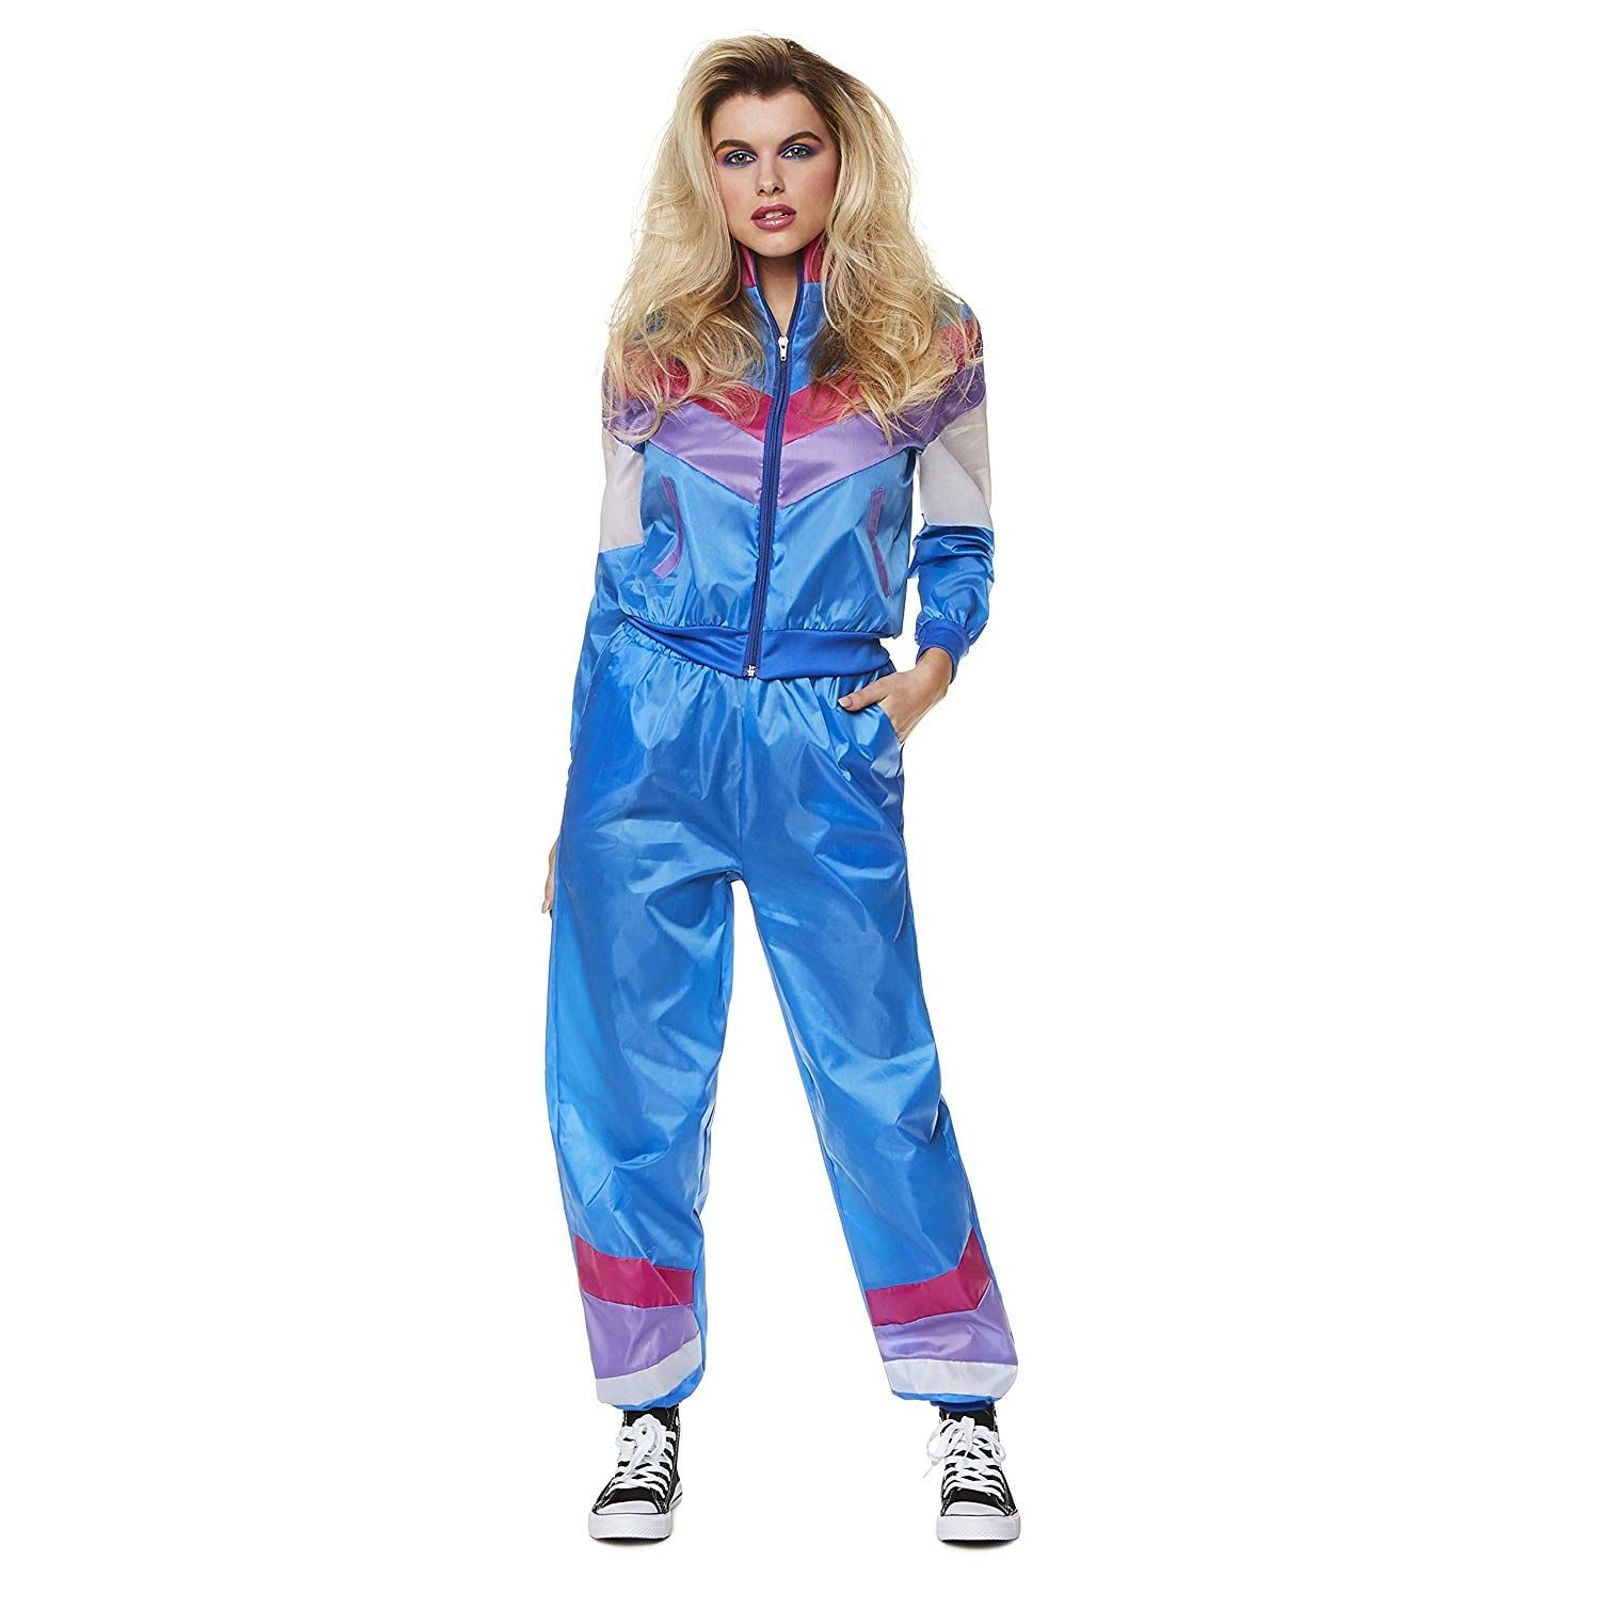 Ladies Shell Suit Costume Fancy Dress 80's Shell Suit - UK 8-10 - Chav  Outfit Pink Shiny Zip Up Jacket + Matching Trousers With Pockets Tracksuit  : Amazon.co.uk: Toys & Games